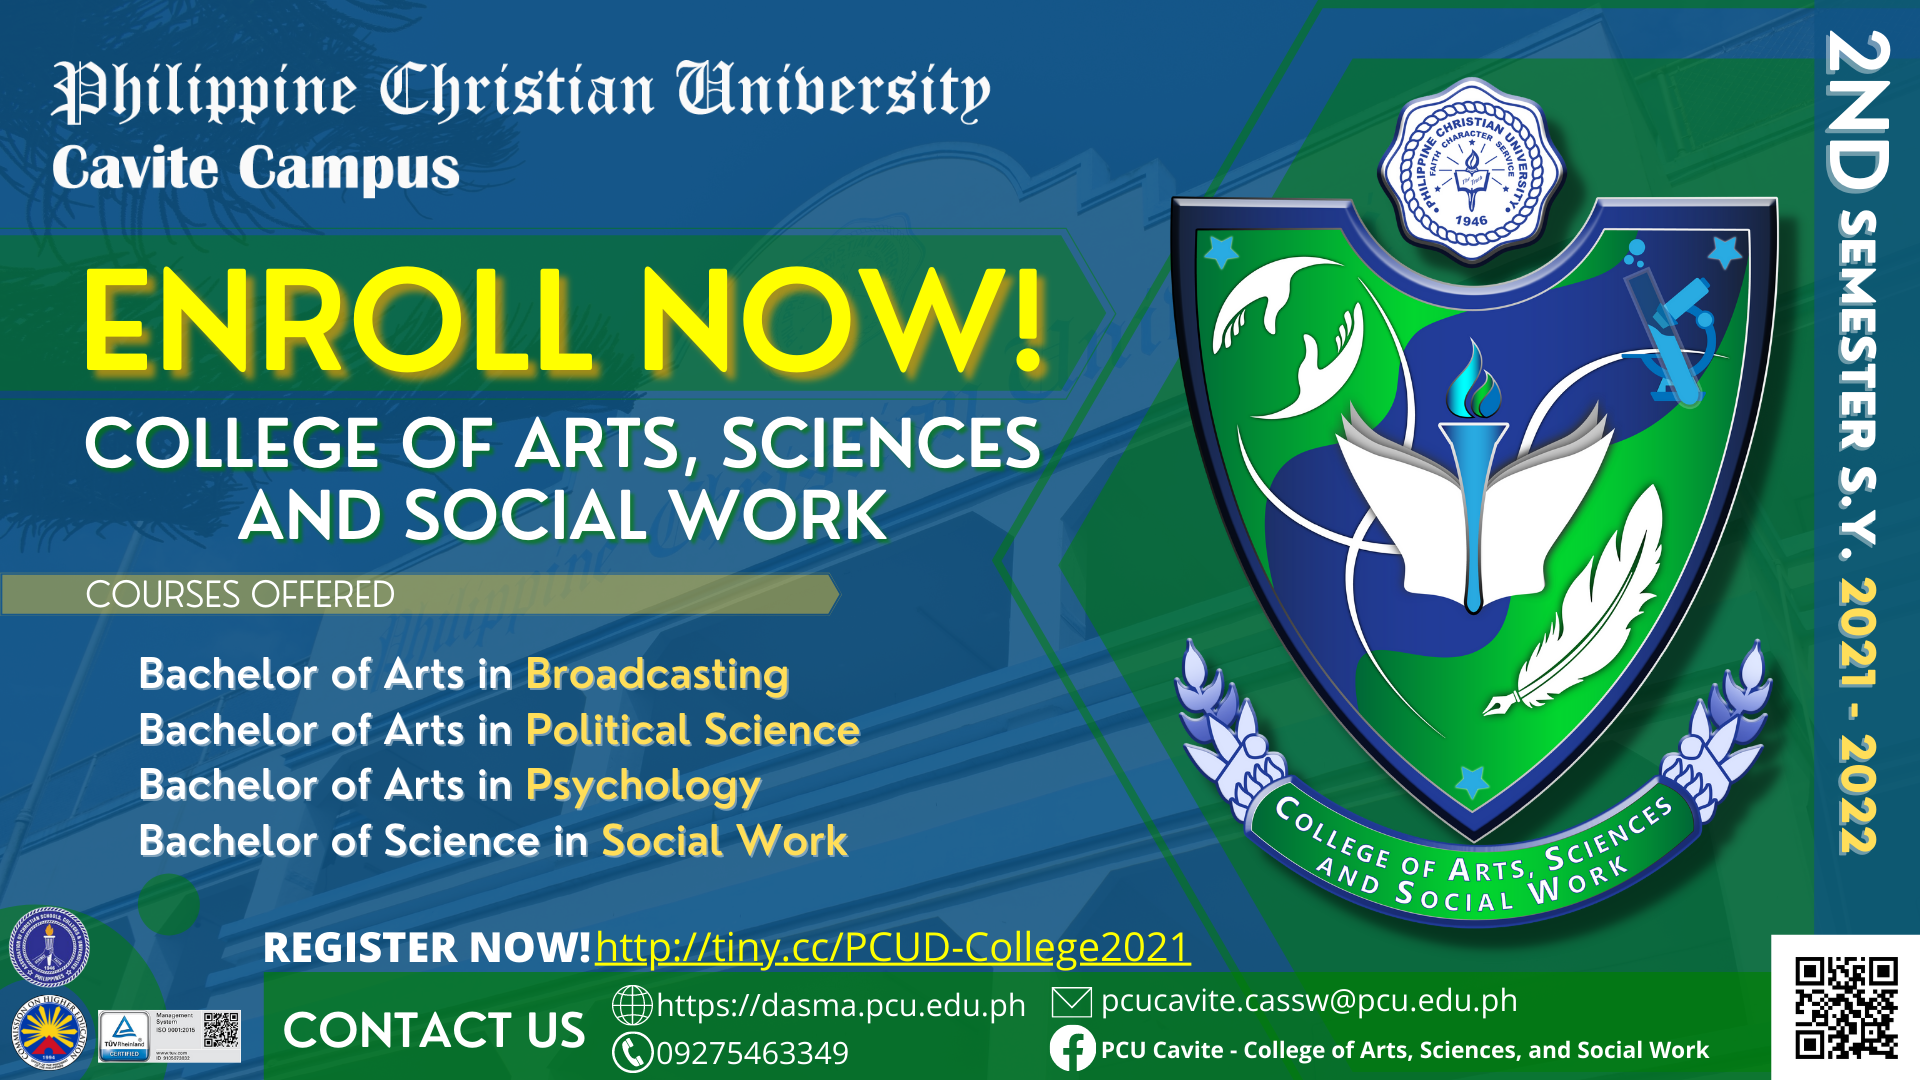 ARTS, SCIENCES, AND SOCIAL WORK